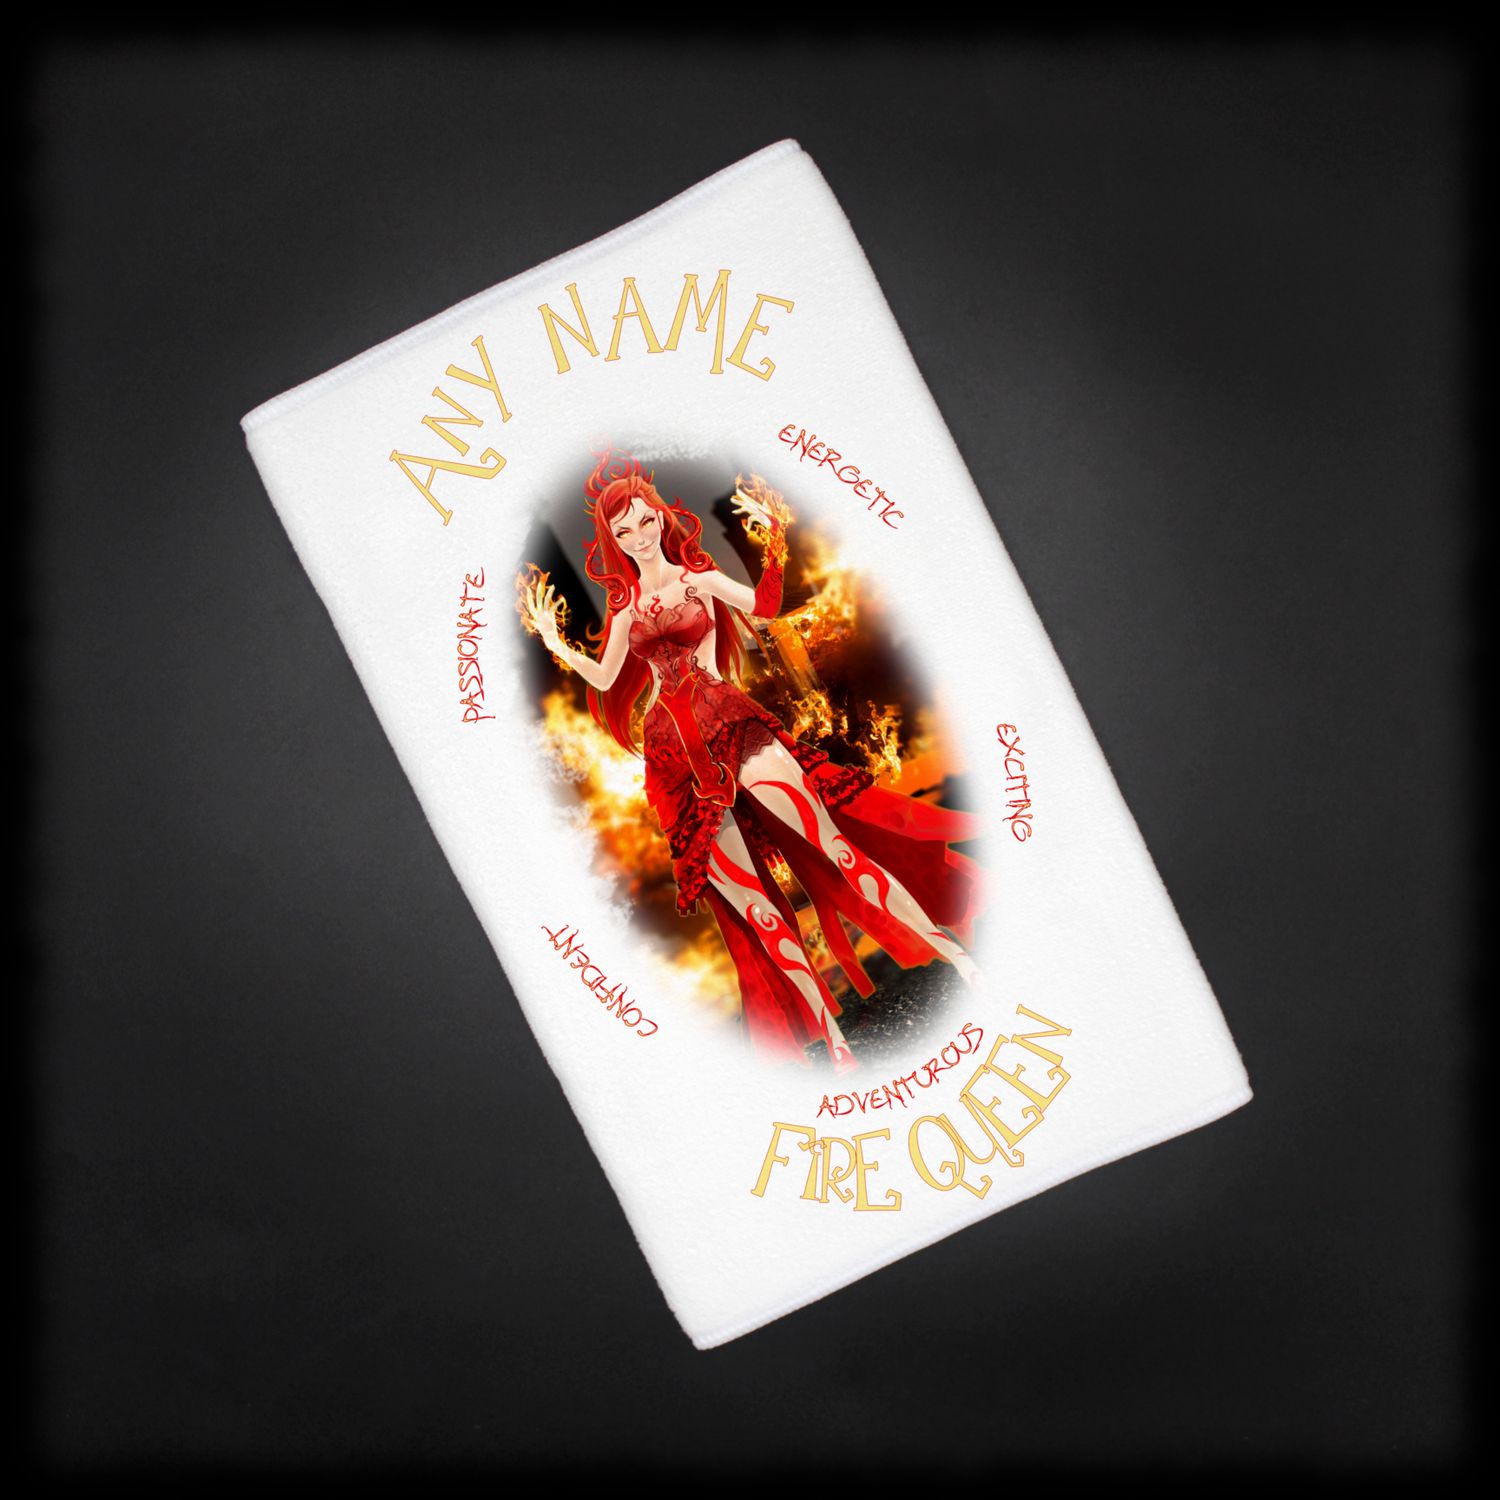 Naturally Wicked Personalised Towel Gift With Wicked Fire Queen On Front - Personalised With Any Name